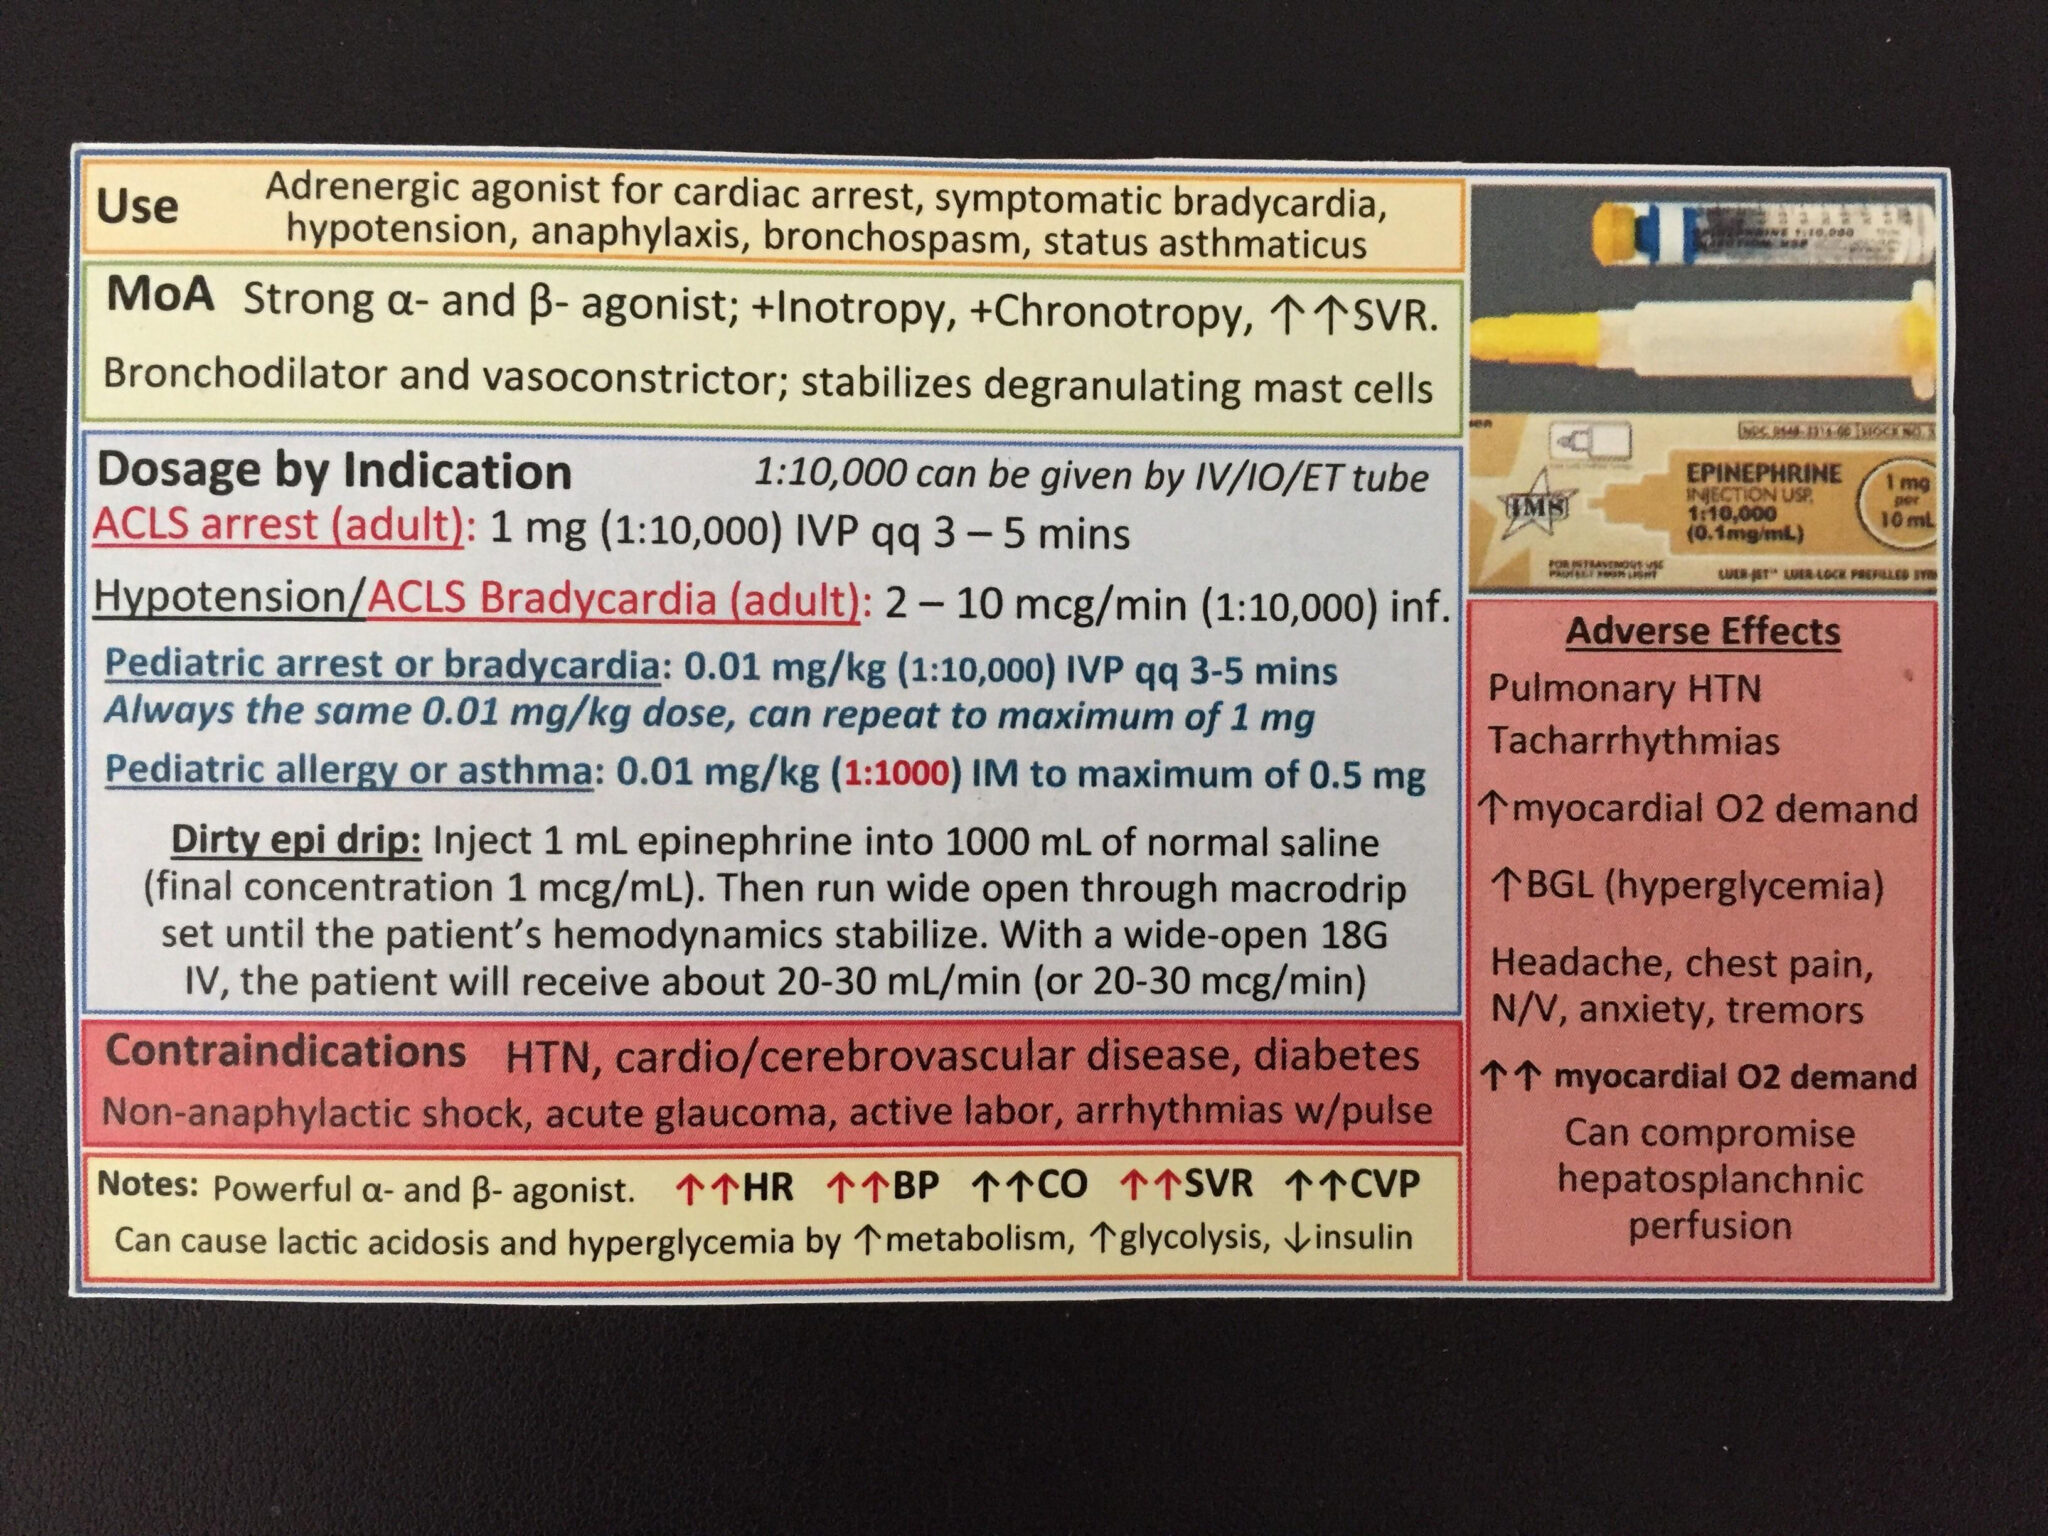 drug-cards-nursing-with-regard-to-pharmacology-drug-card-template-professional-template-ideas